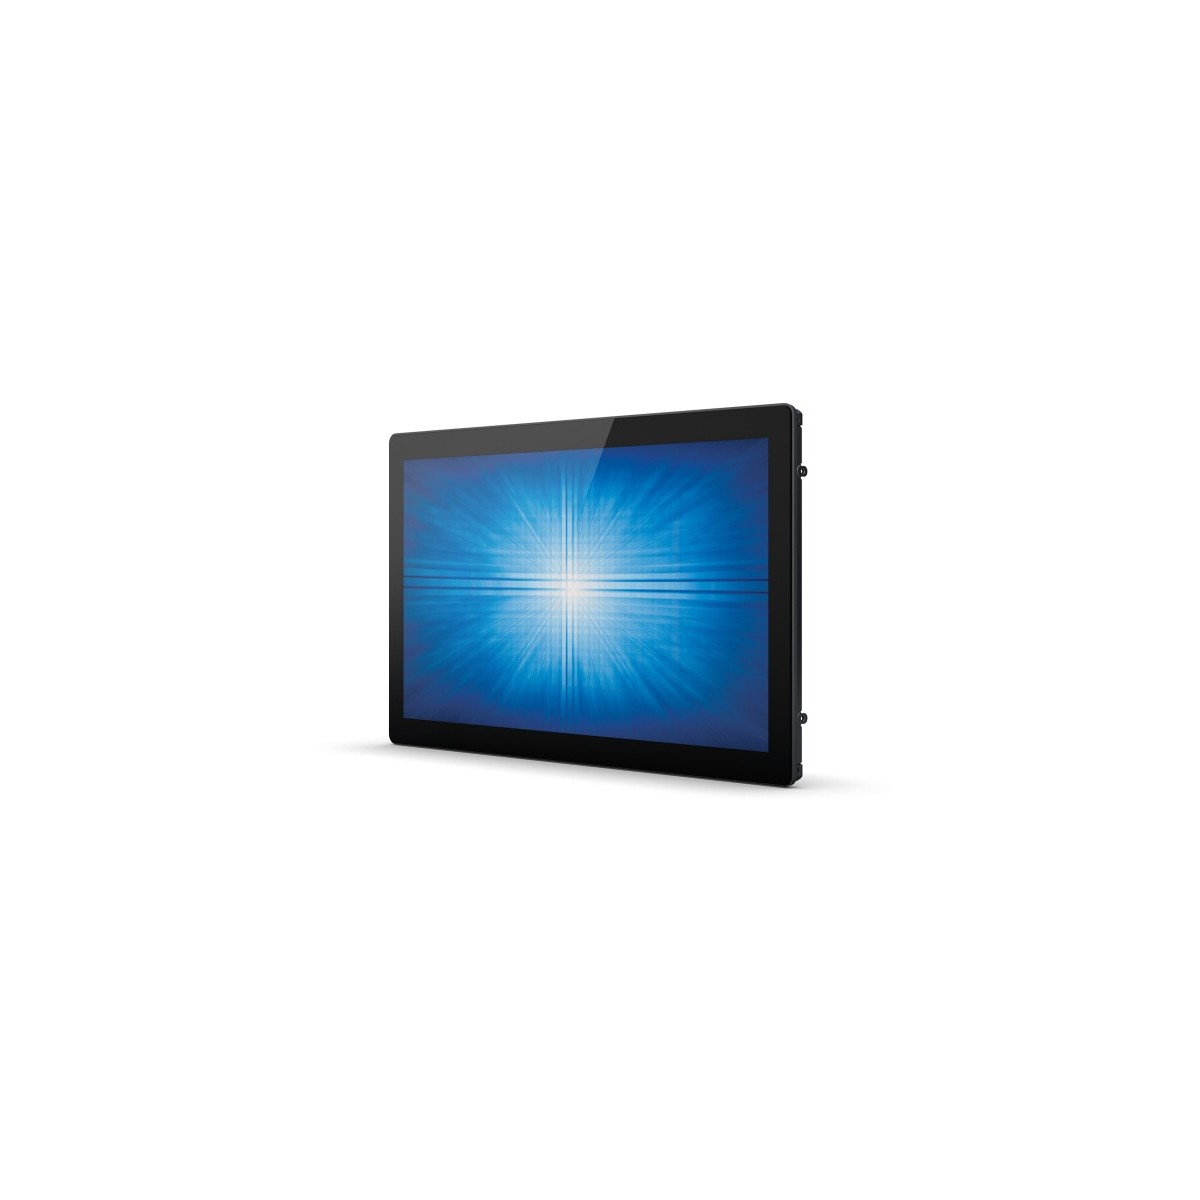 Elo Touch Solutions Elo Touch Solution 2295L - 54.6 cm (21.5") - 400 cd/m² - Full HD - LED - 16:9 - 14 ms